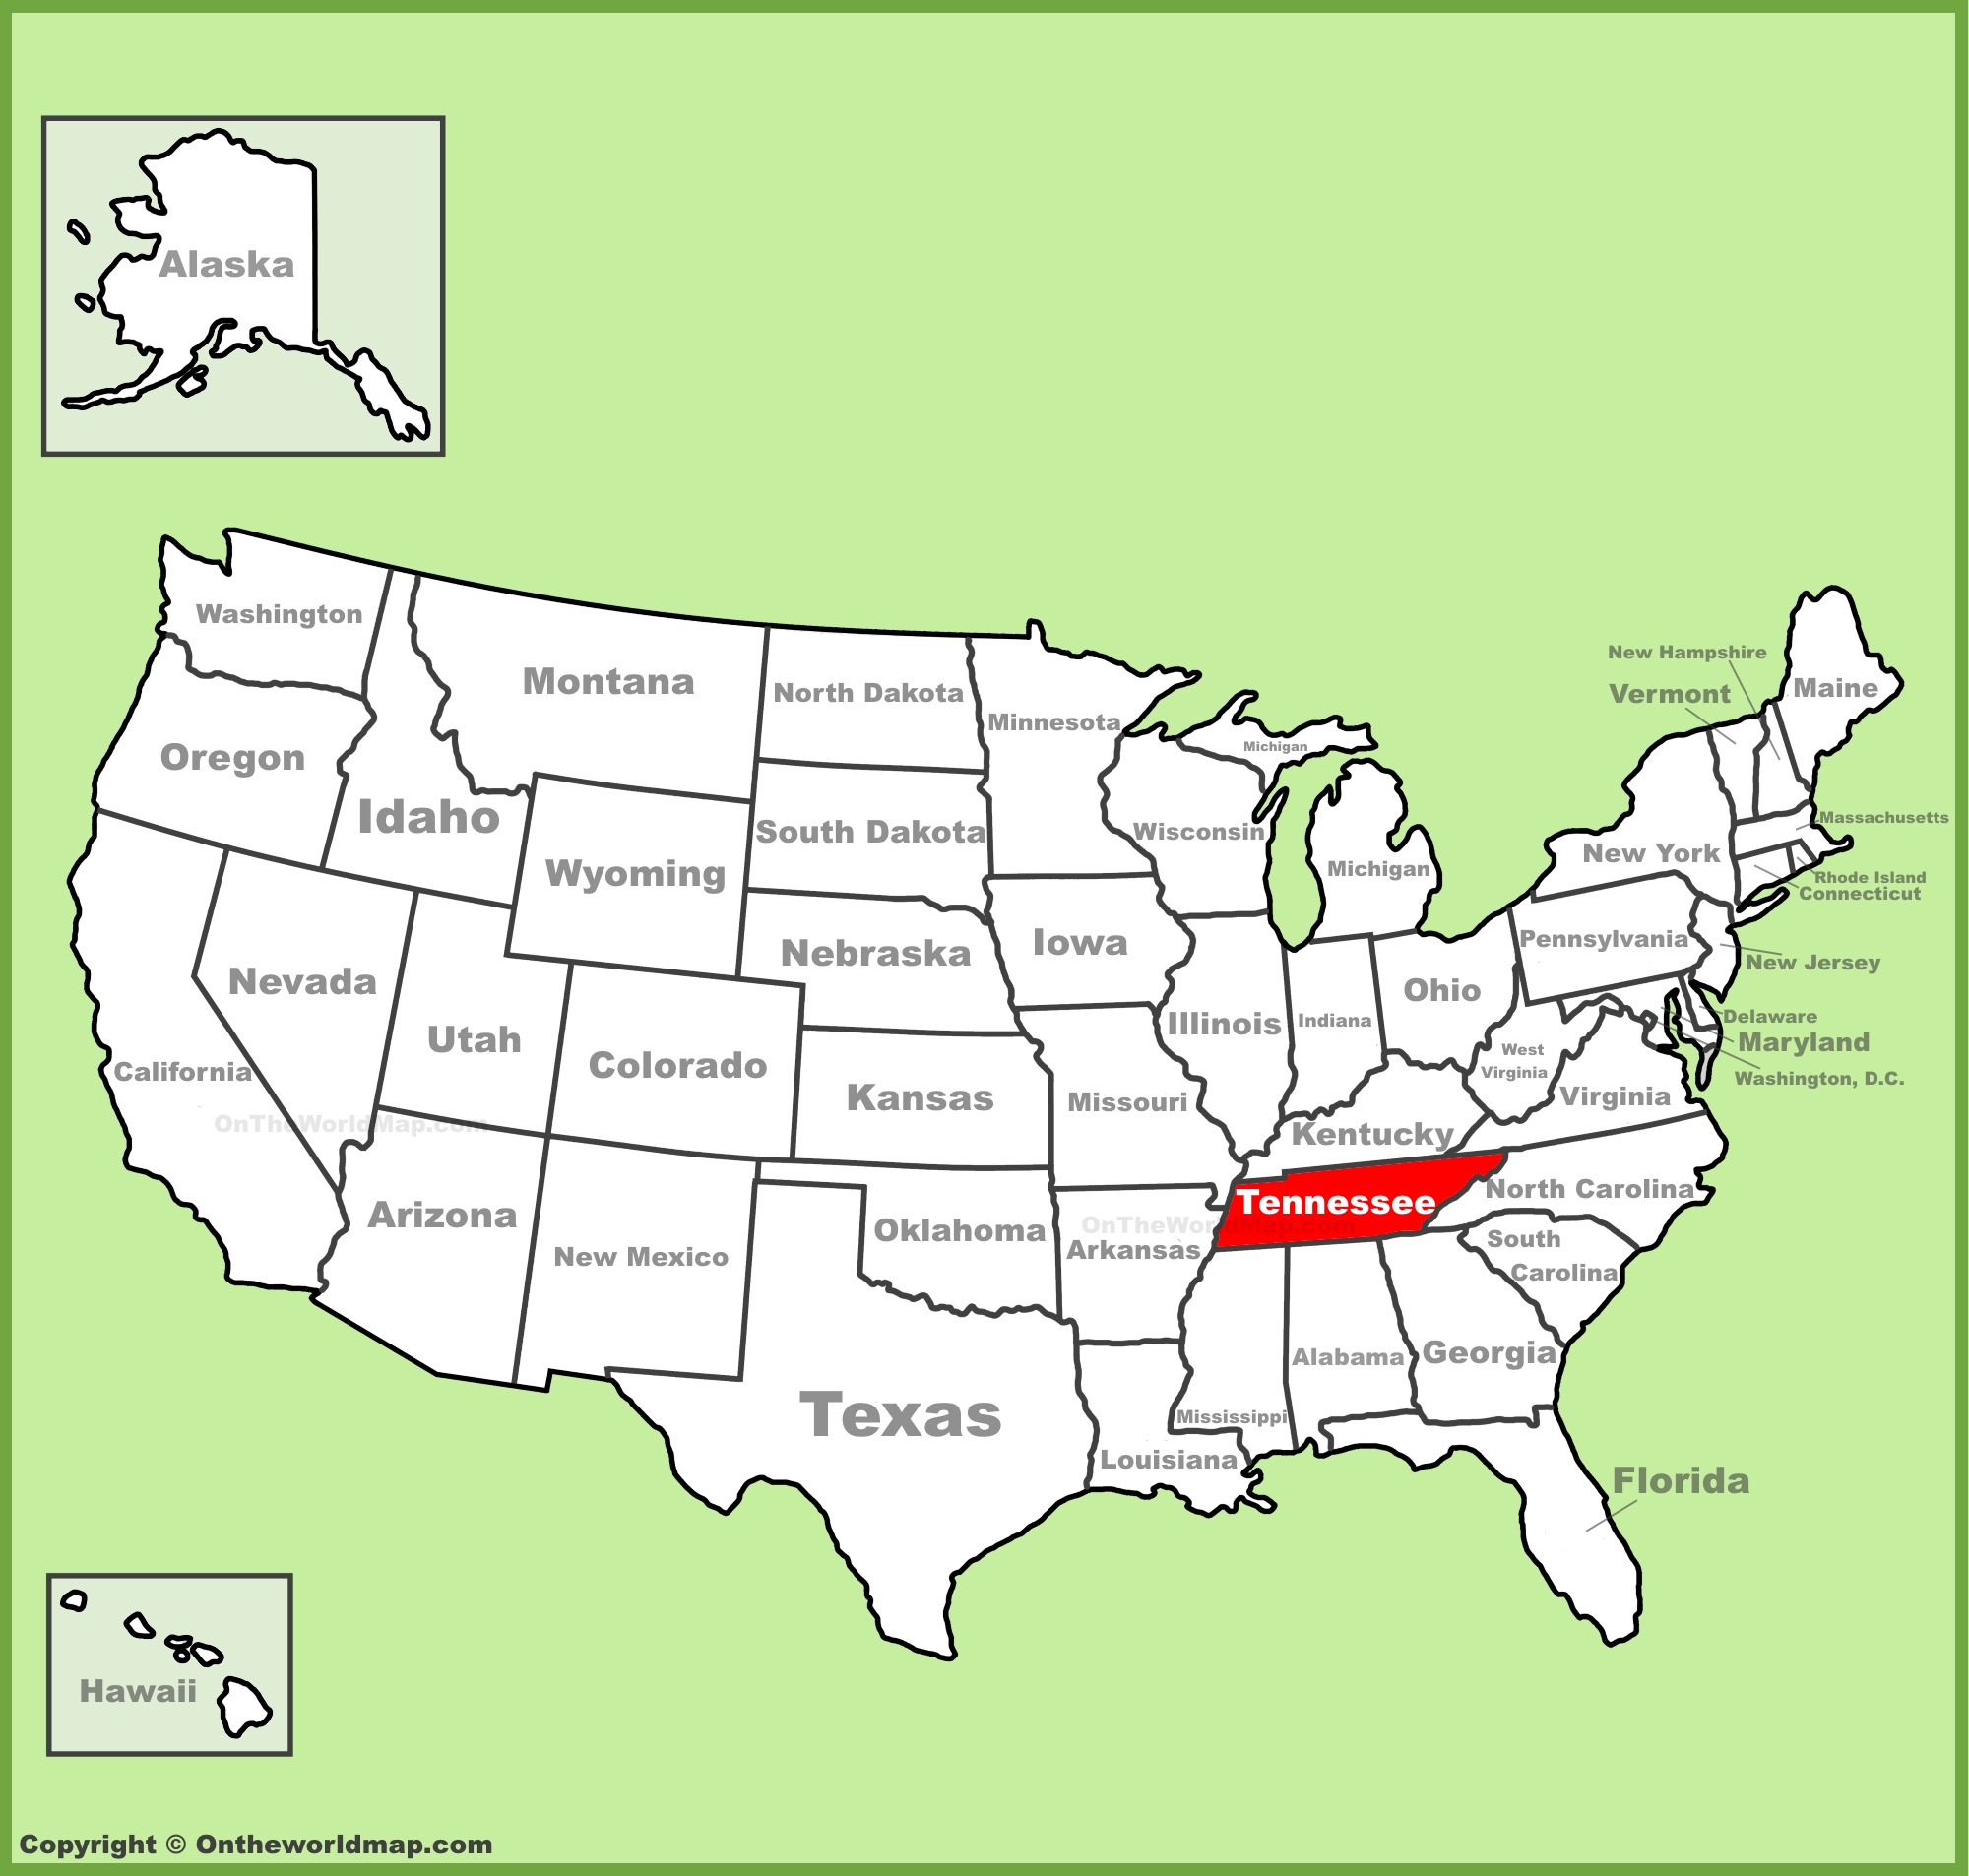 Tennessee Location On The U S Map